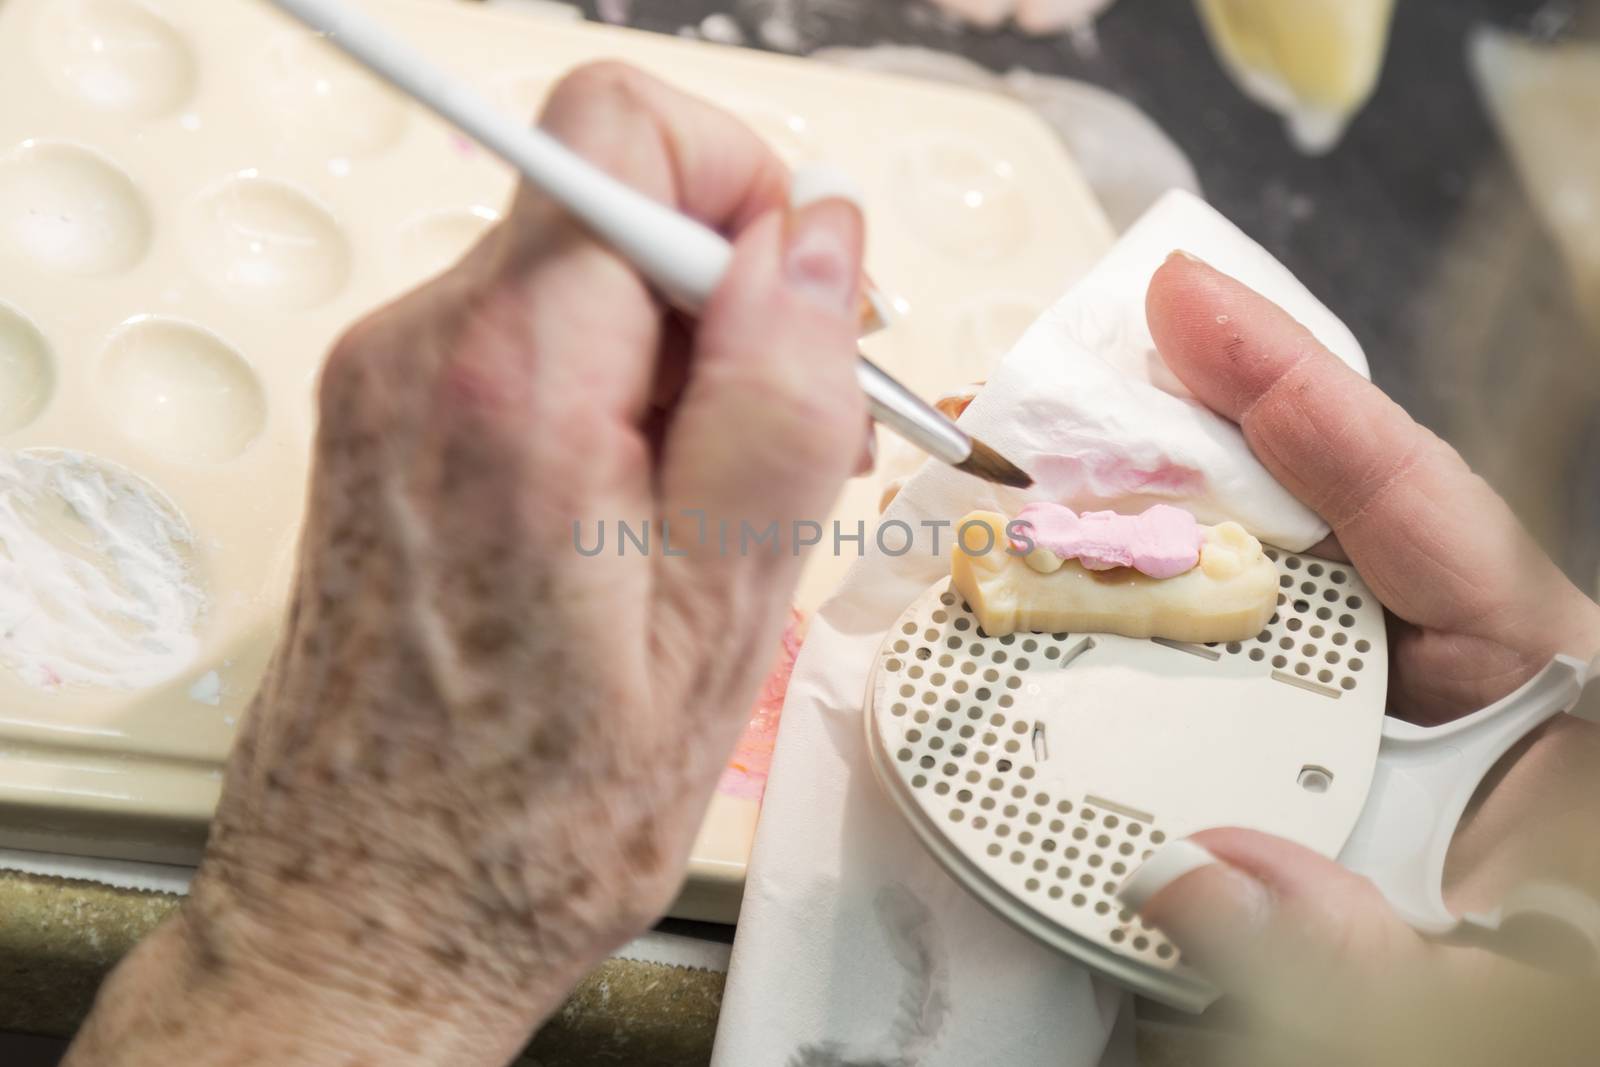 Dental Technician Applying Porcelain To 3D Printed Implant Mold by Feverpitched